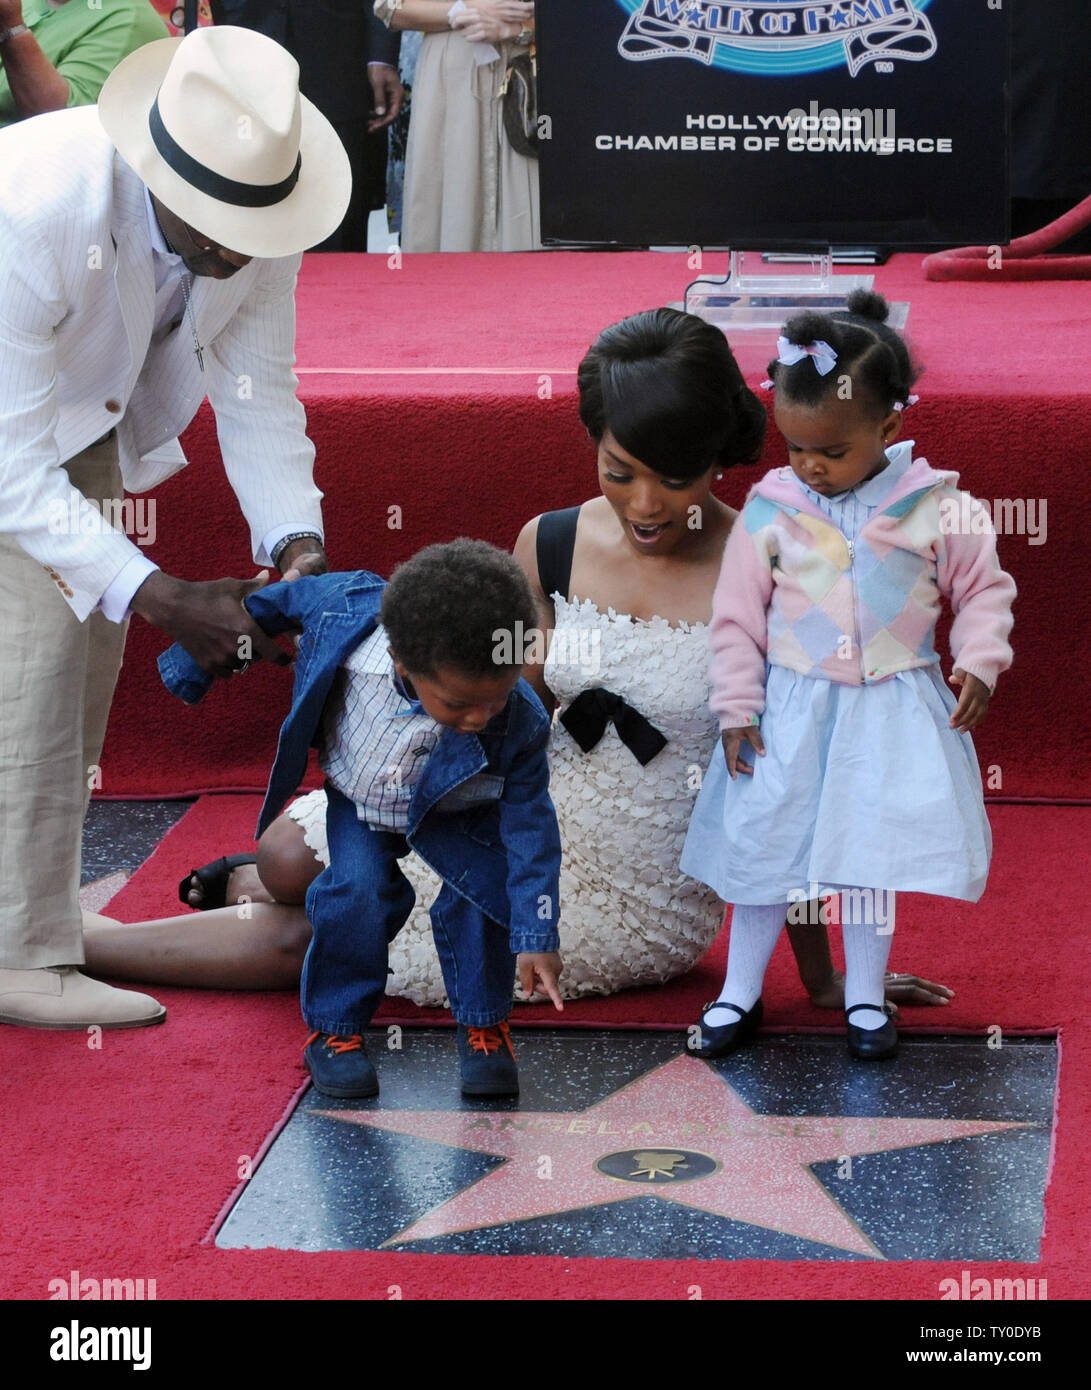 Actress Angela Bassett (R) and her husband, actor Cortney B. Vance gather around her star with their son Slater Josiah and daughter Bronwyn Golden during an unveiling ceremony honoring Bassett with the 2,358th star on the Hollywood Walk of Fame in Los Angeles on March 20, 2008. (UPI Photo/Jim Ruymen) Stock Photo